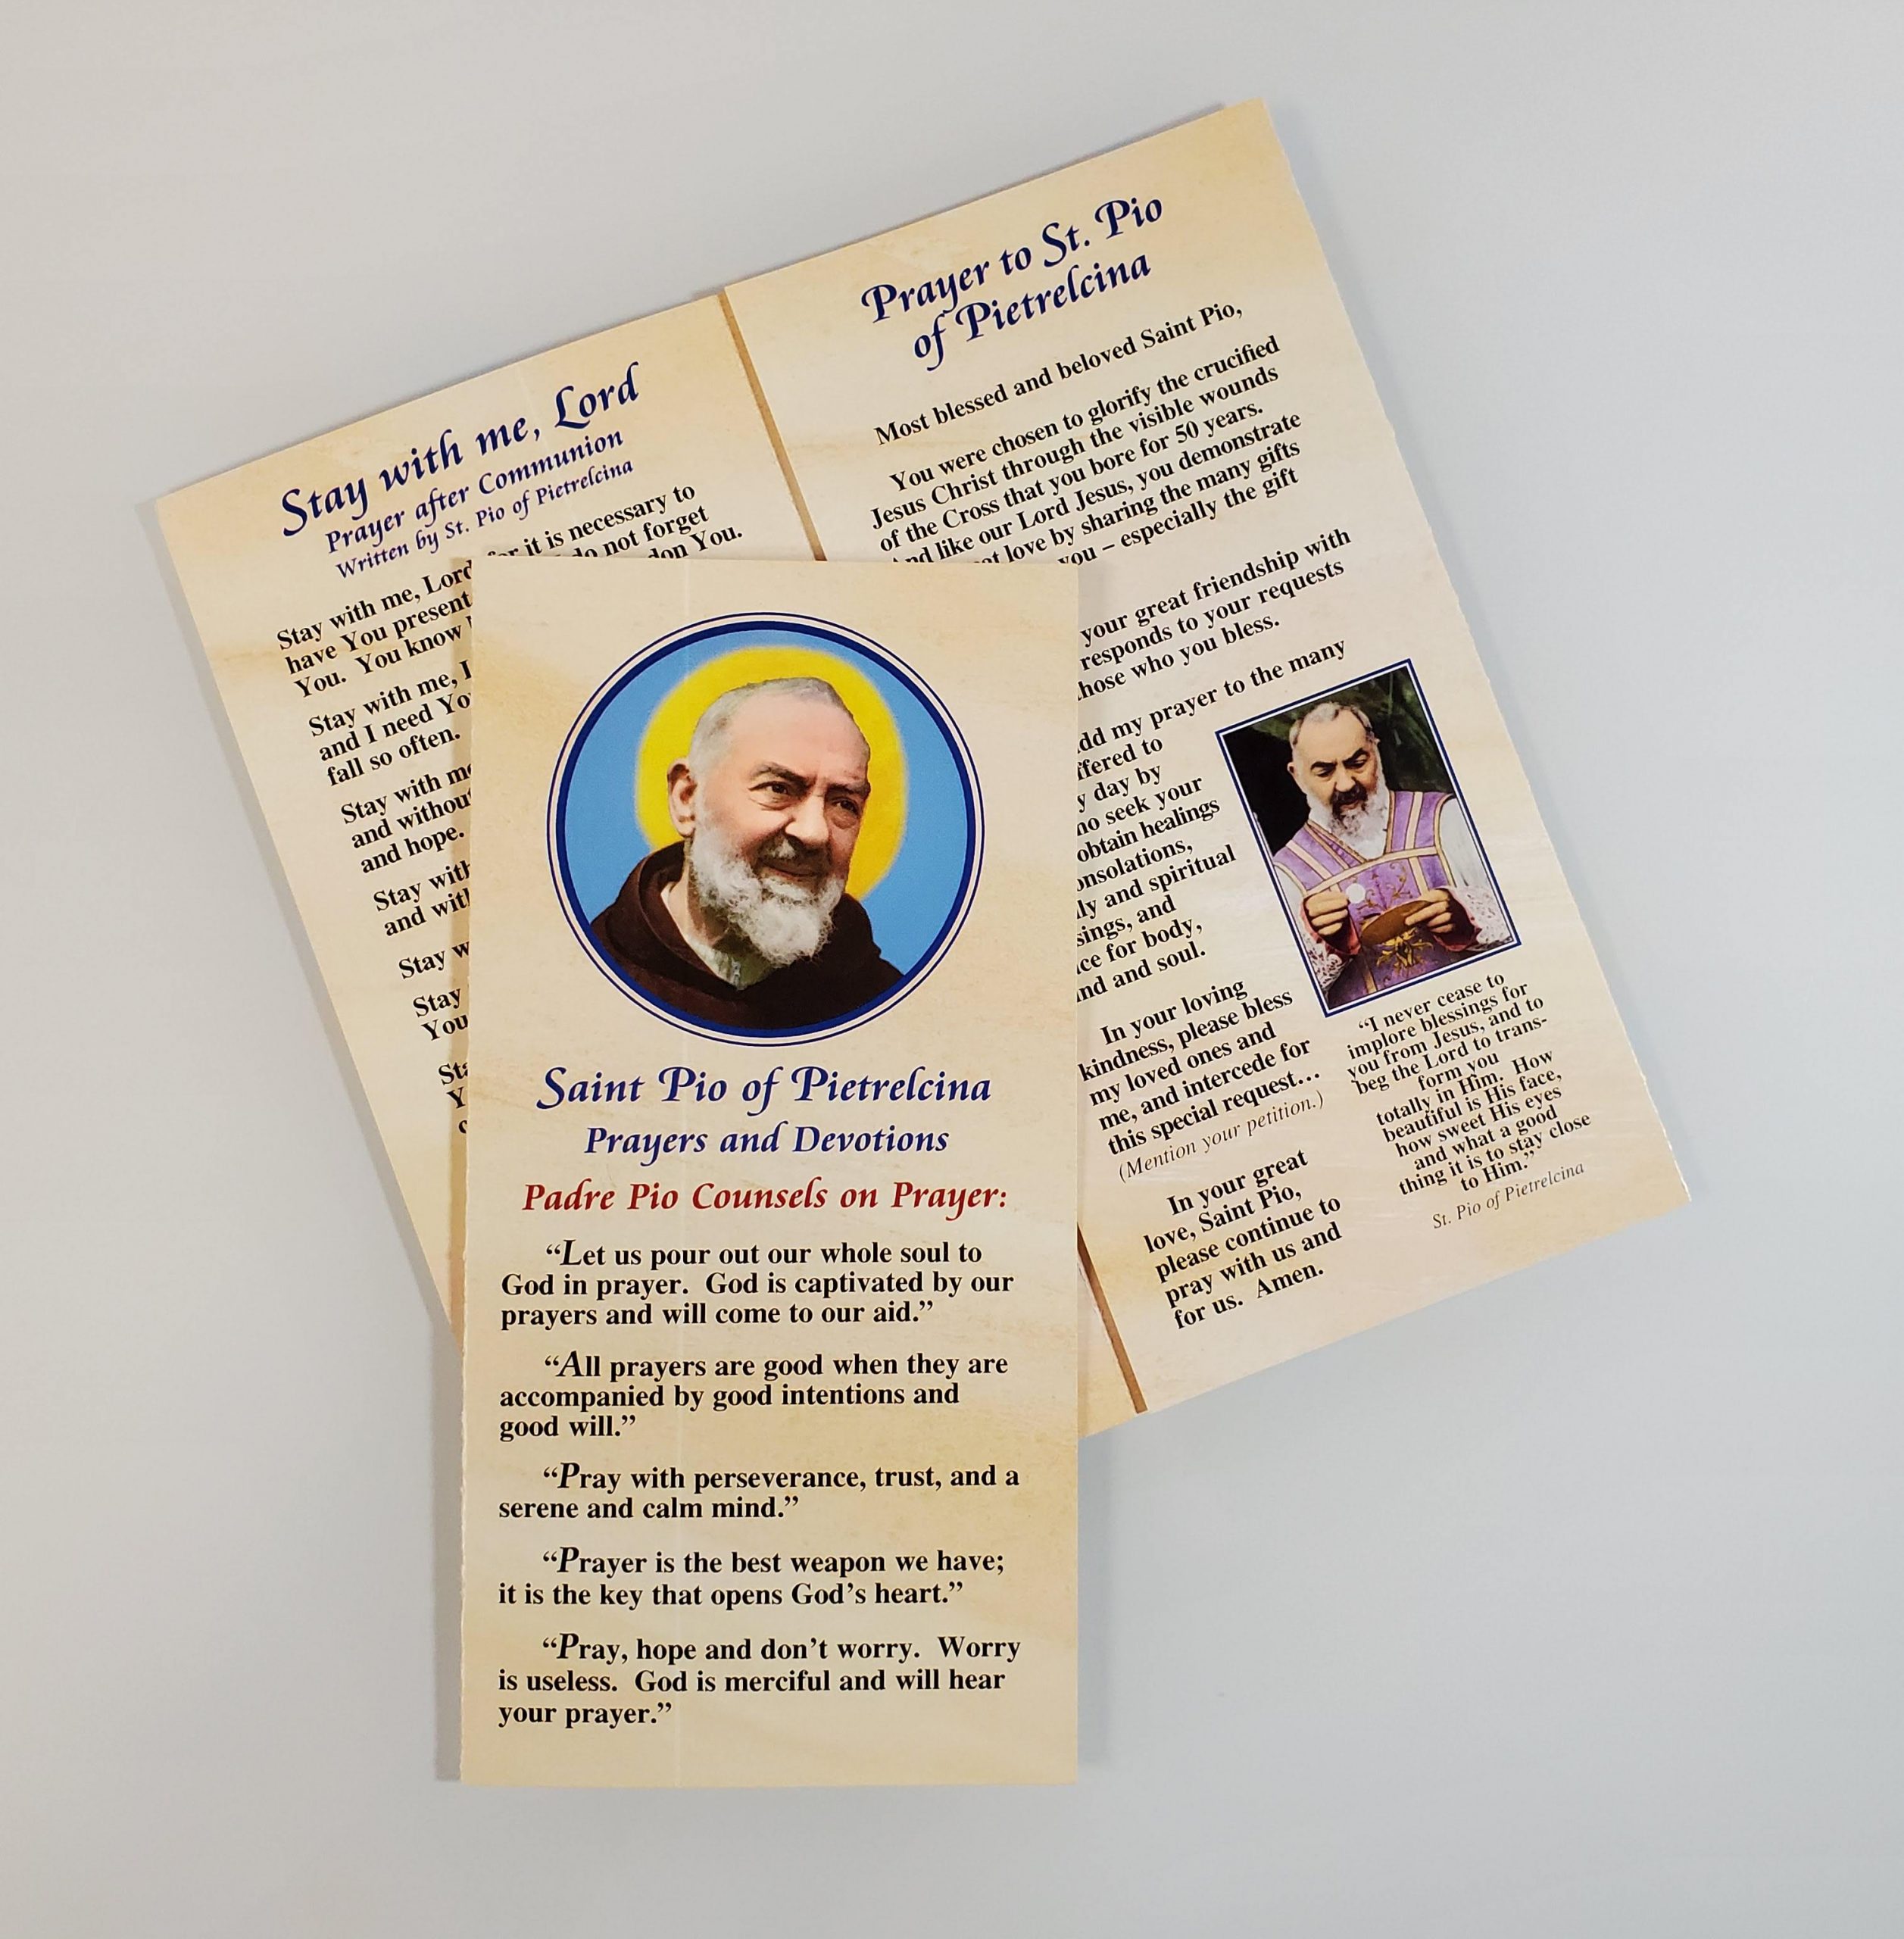 Prayers and Devotions Leaflet - Padre Pio Foundation of America